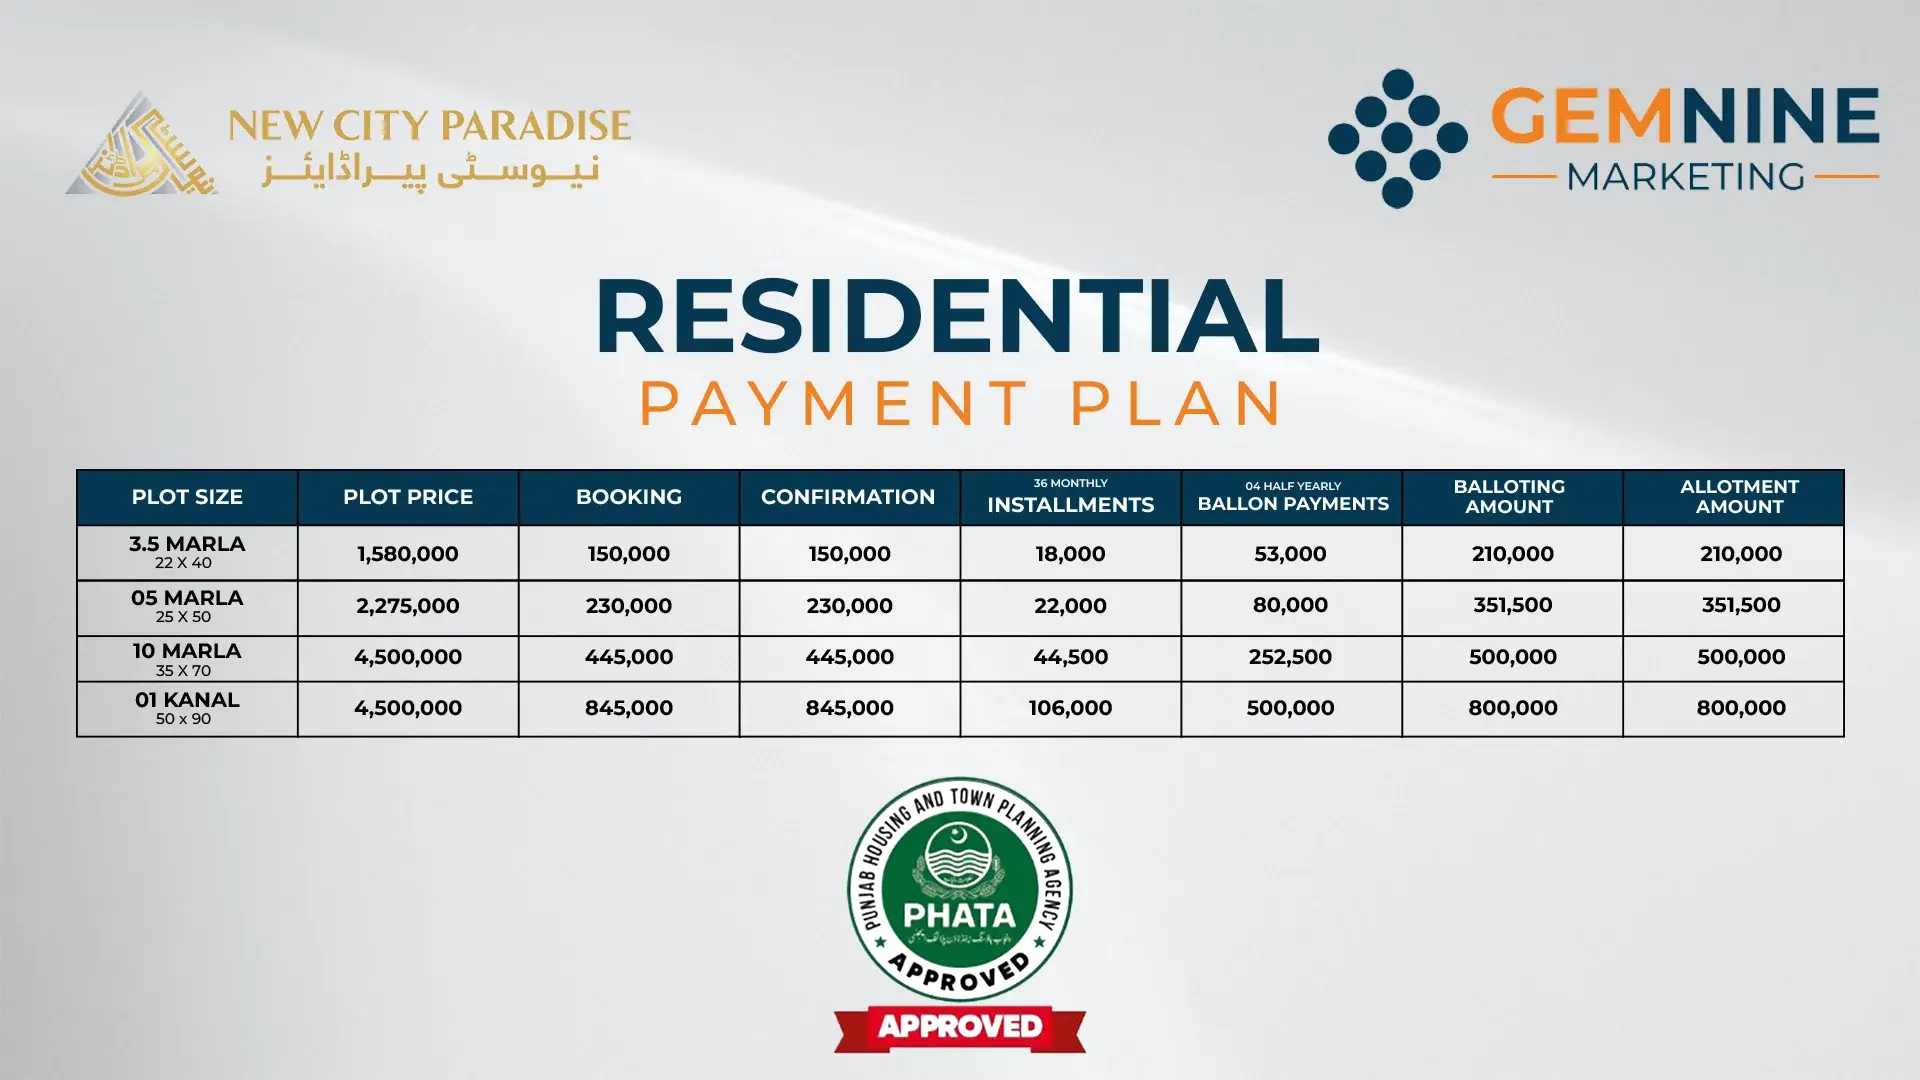 New City Paradise Residential Payment Plan: